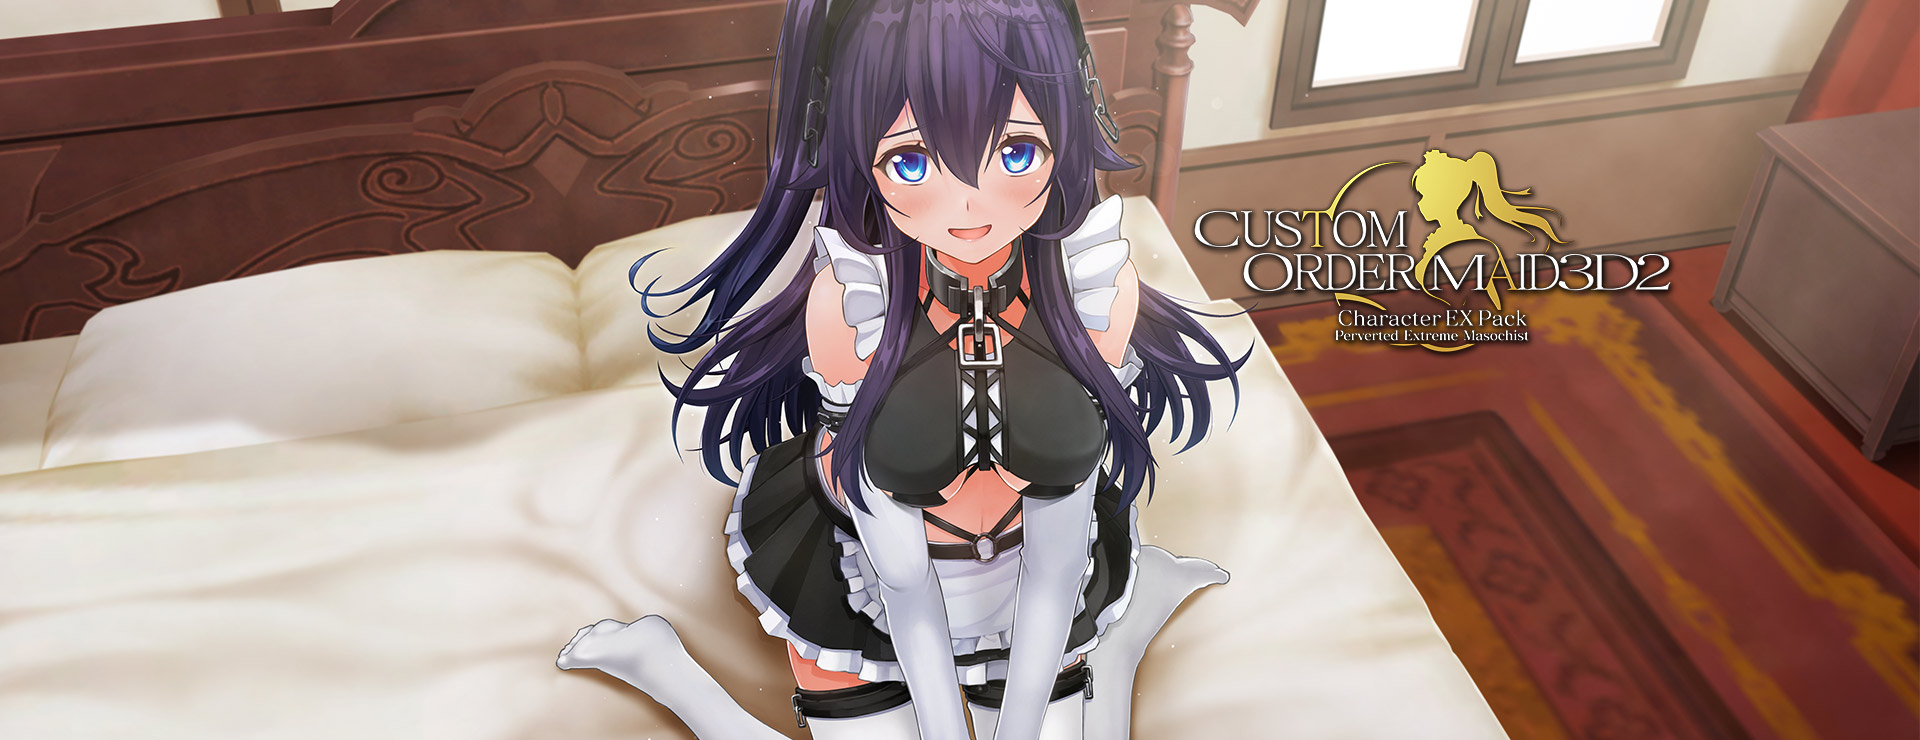 Custom Order Maid 3D 2: Character EX Pack Perverted Extreme Masochist - Symulacja Gra